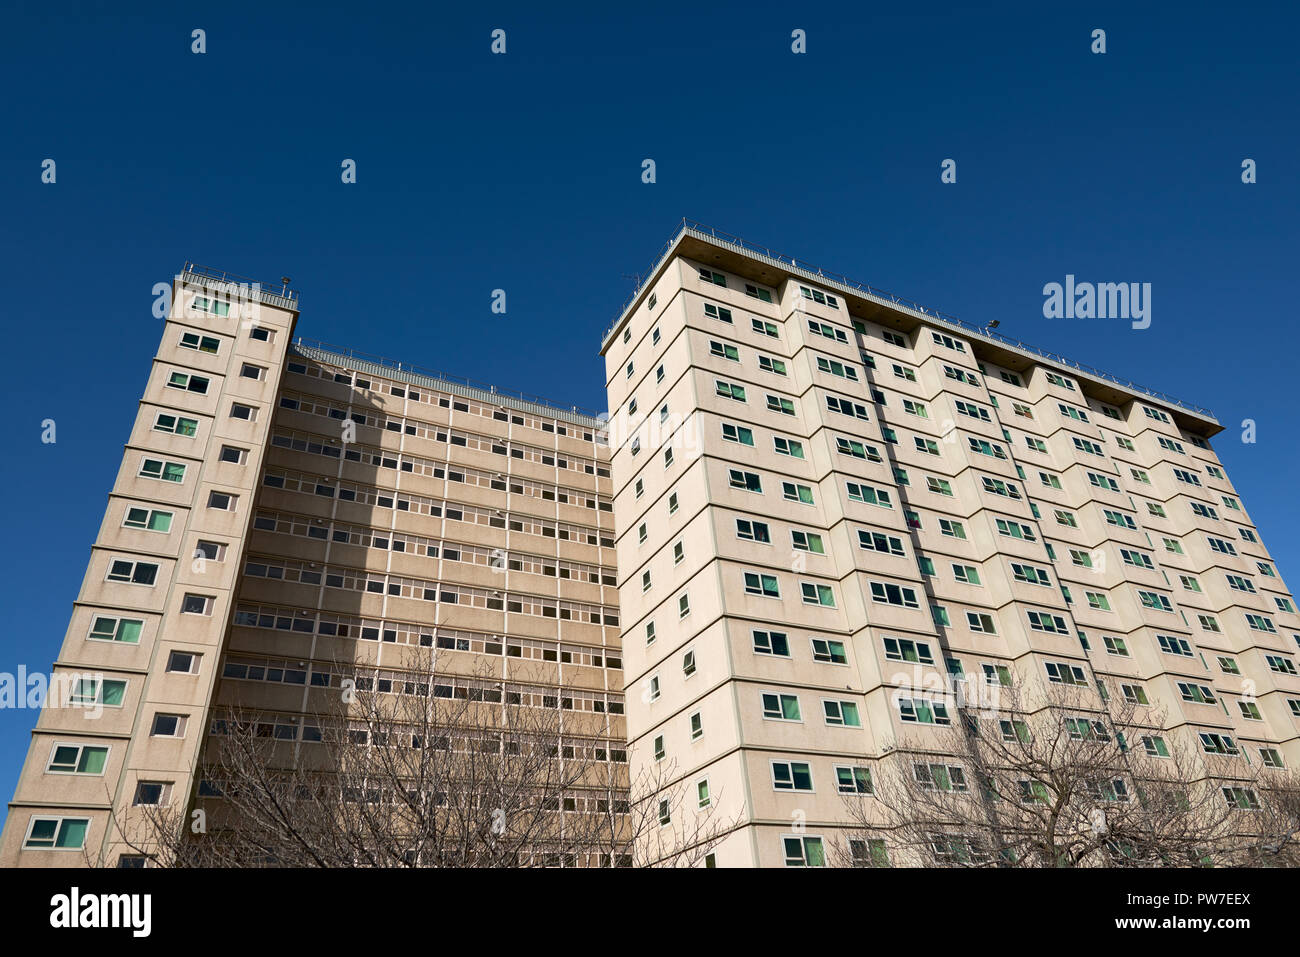 A council apartment block against a clear blue sky. Occupied predominantly by welfare recipients, immigrants and the elderly. Stock Photo